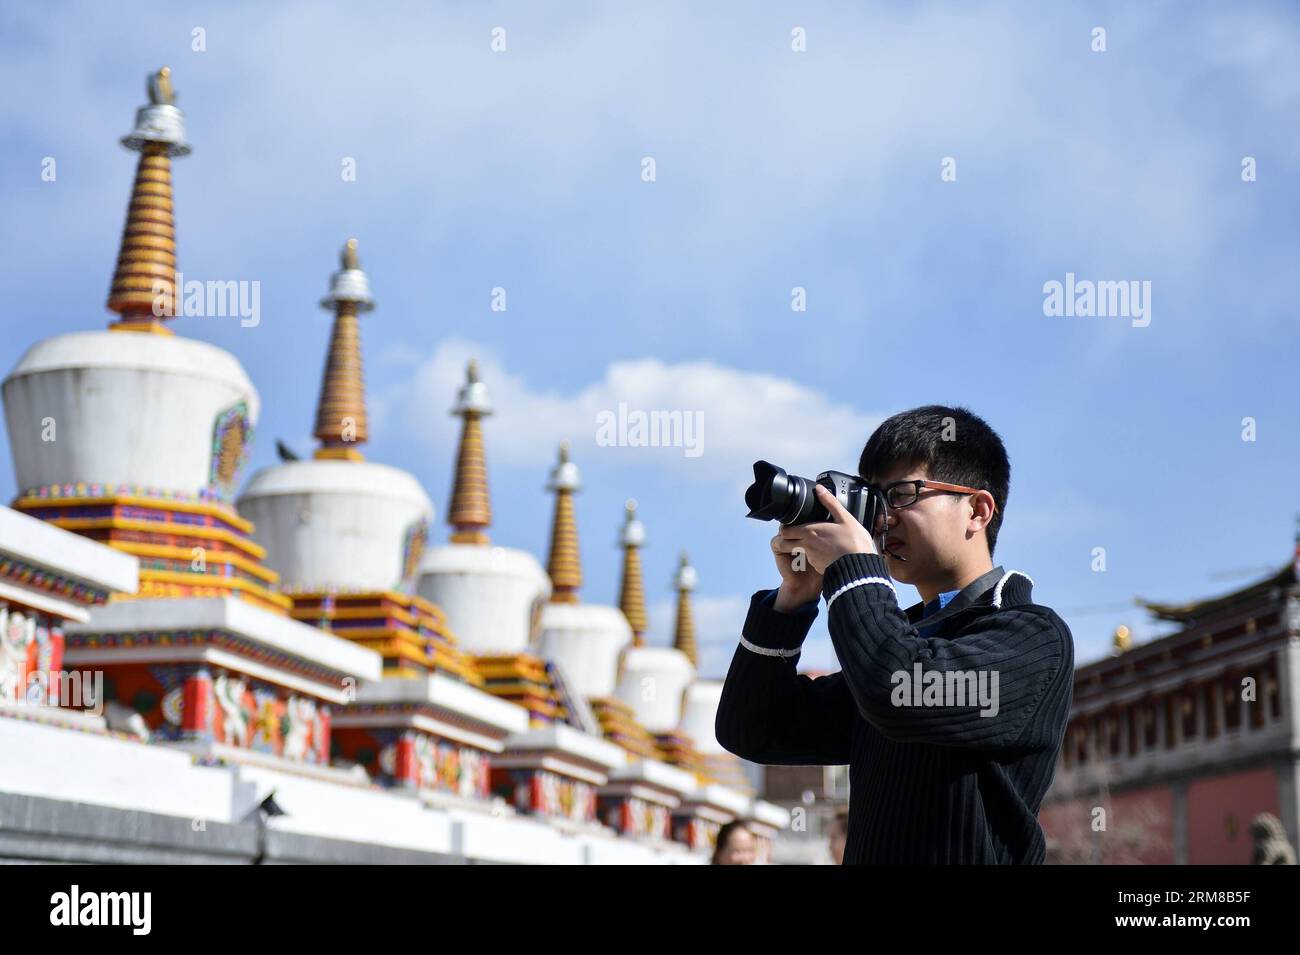 (140406) -- HUANGZHONG COUNTY, April 6, 2014 (Xinhua) -- A tourist taks photos in the Kumbum Monastery in Huangzhong County of Xining, capital of northwest China s Qinghai Province, April 6, 2014. The Kumbum Monastery is a main destination for Tibetan Buddhist pilgrims. It is also a major tourist attraction in Qinghai, which features splendid religious murals, Thangka appliques and butter sculptures. (Xinhua/Wu Gang) (lmm) CHINA-QINGHAI-KUMBUM MONASTERY-TOURISM (CN) PUBLICATIONxNOTxINxCHN   Huang Zhong County April 6 2014 XINHUA a Tourist taks Photos in The Kumbum monastery in Huang Zhong Coun Stock Photo